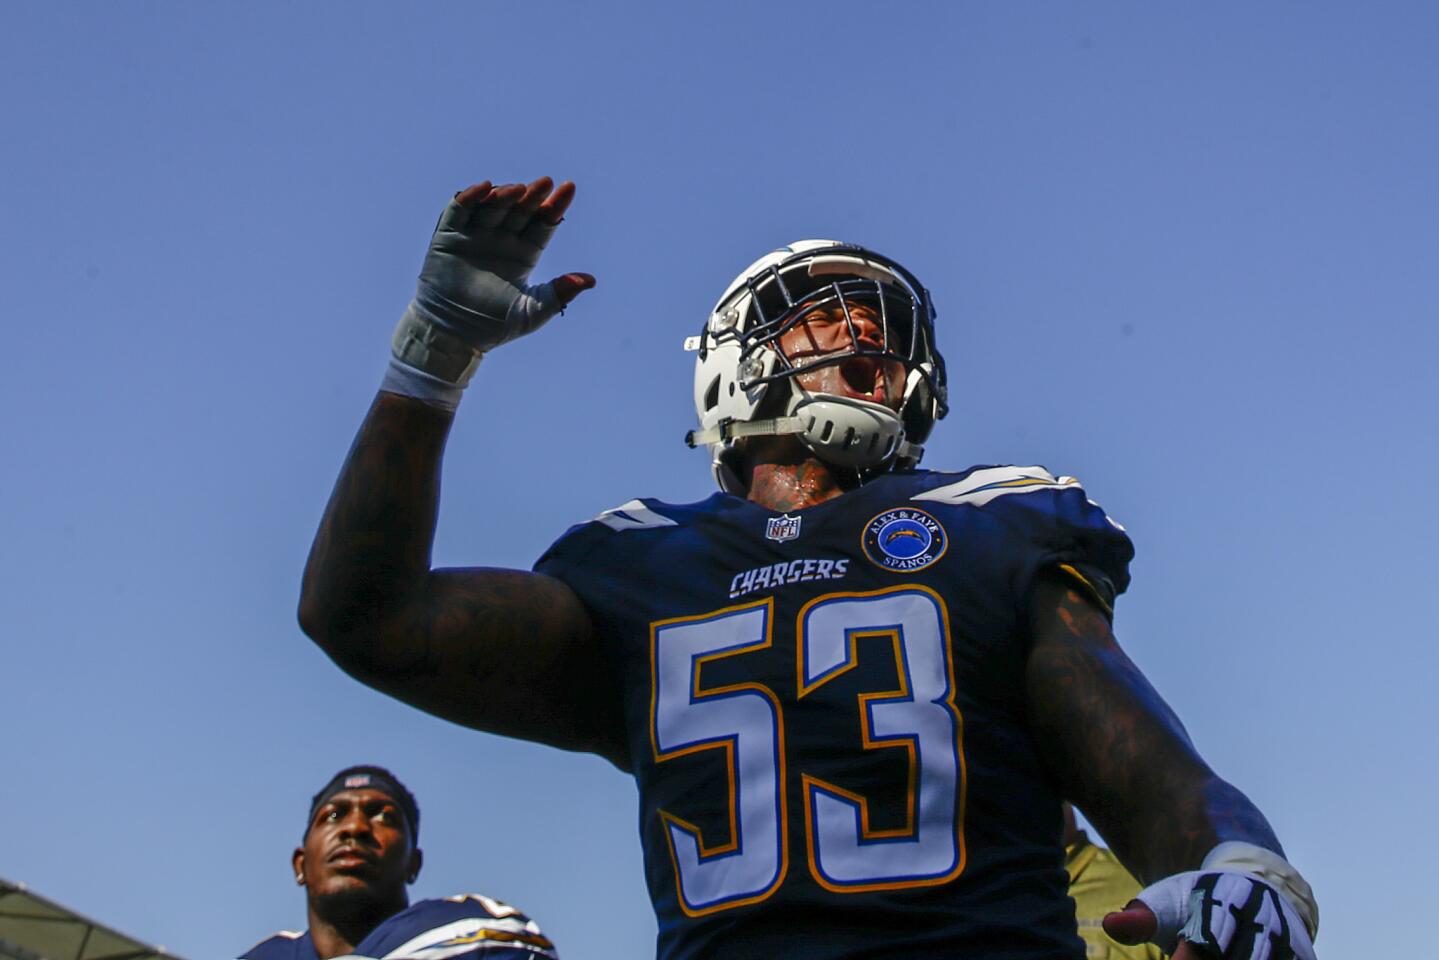 Chargers center Mike Pouncey yells out on his way to the locker room before a game against the Denver Broncos at Stubhub Center on Sunday.